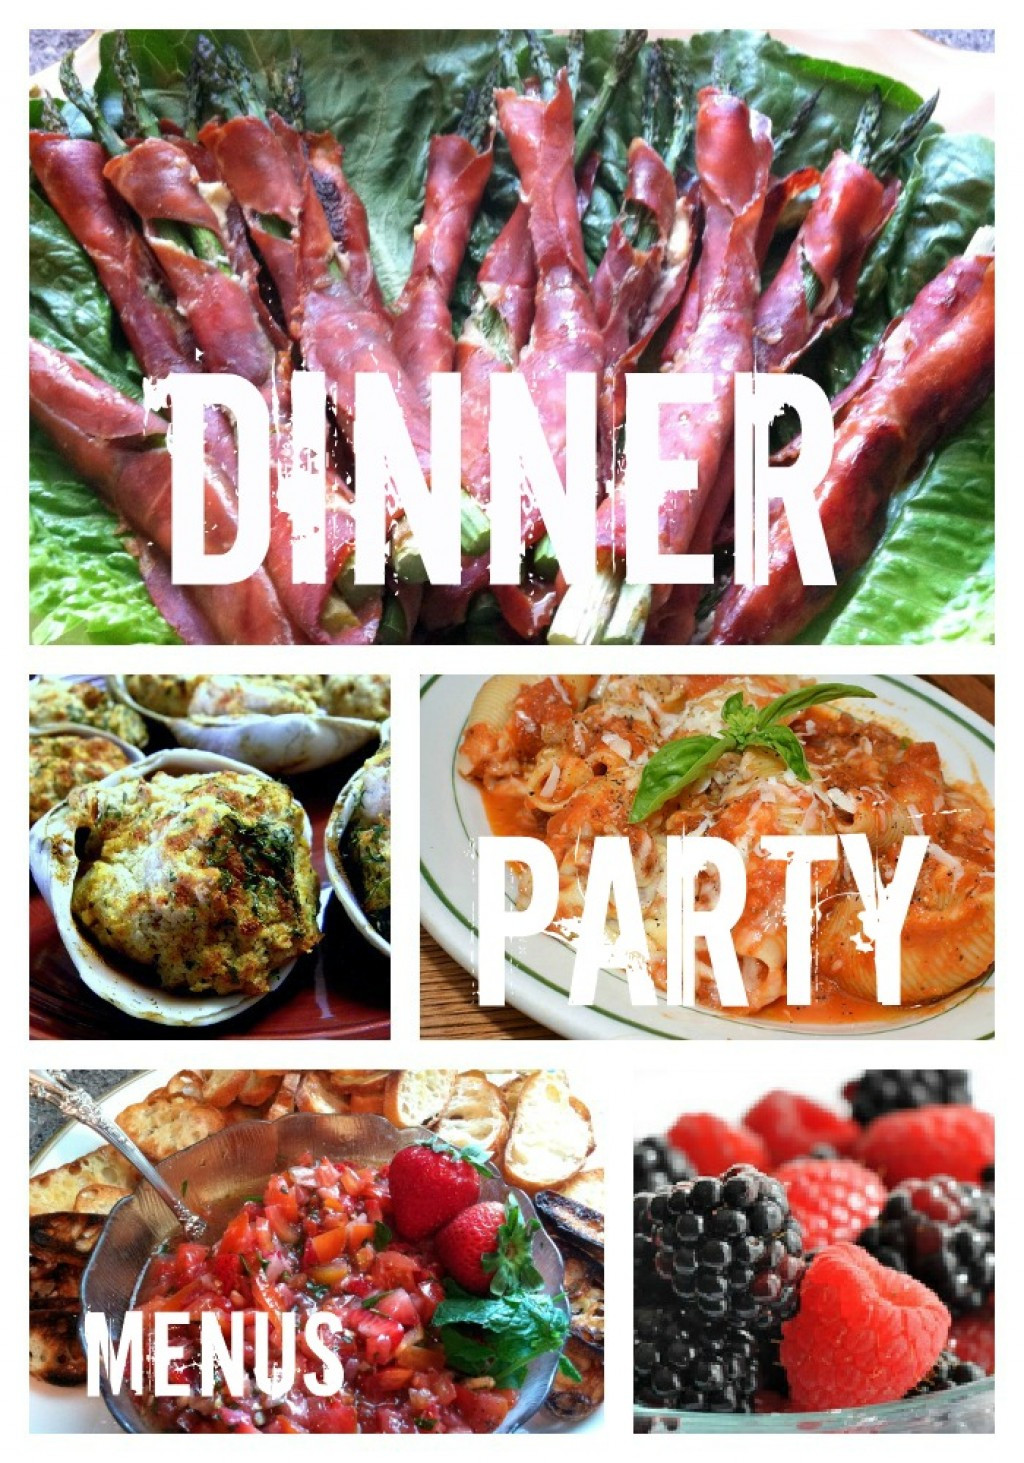 Menu Ideas For Dinner Party
 Dinner Party Recipes